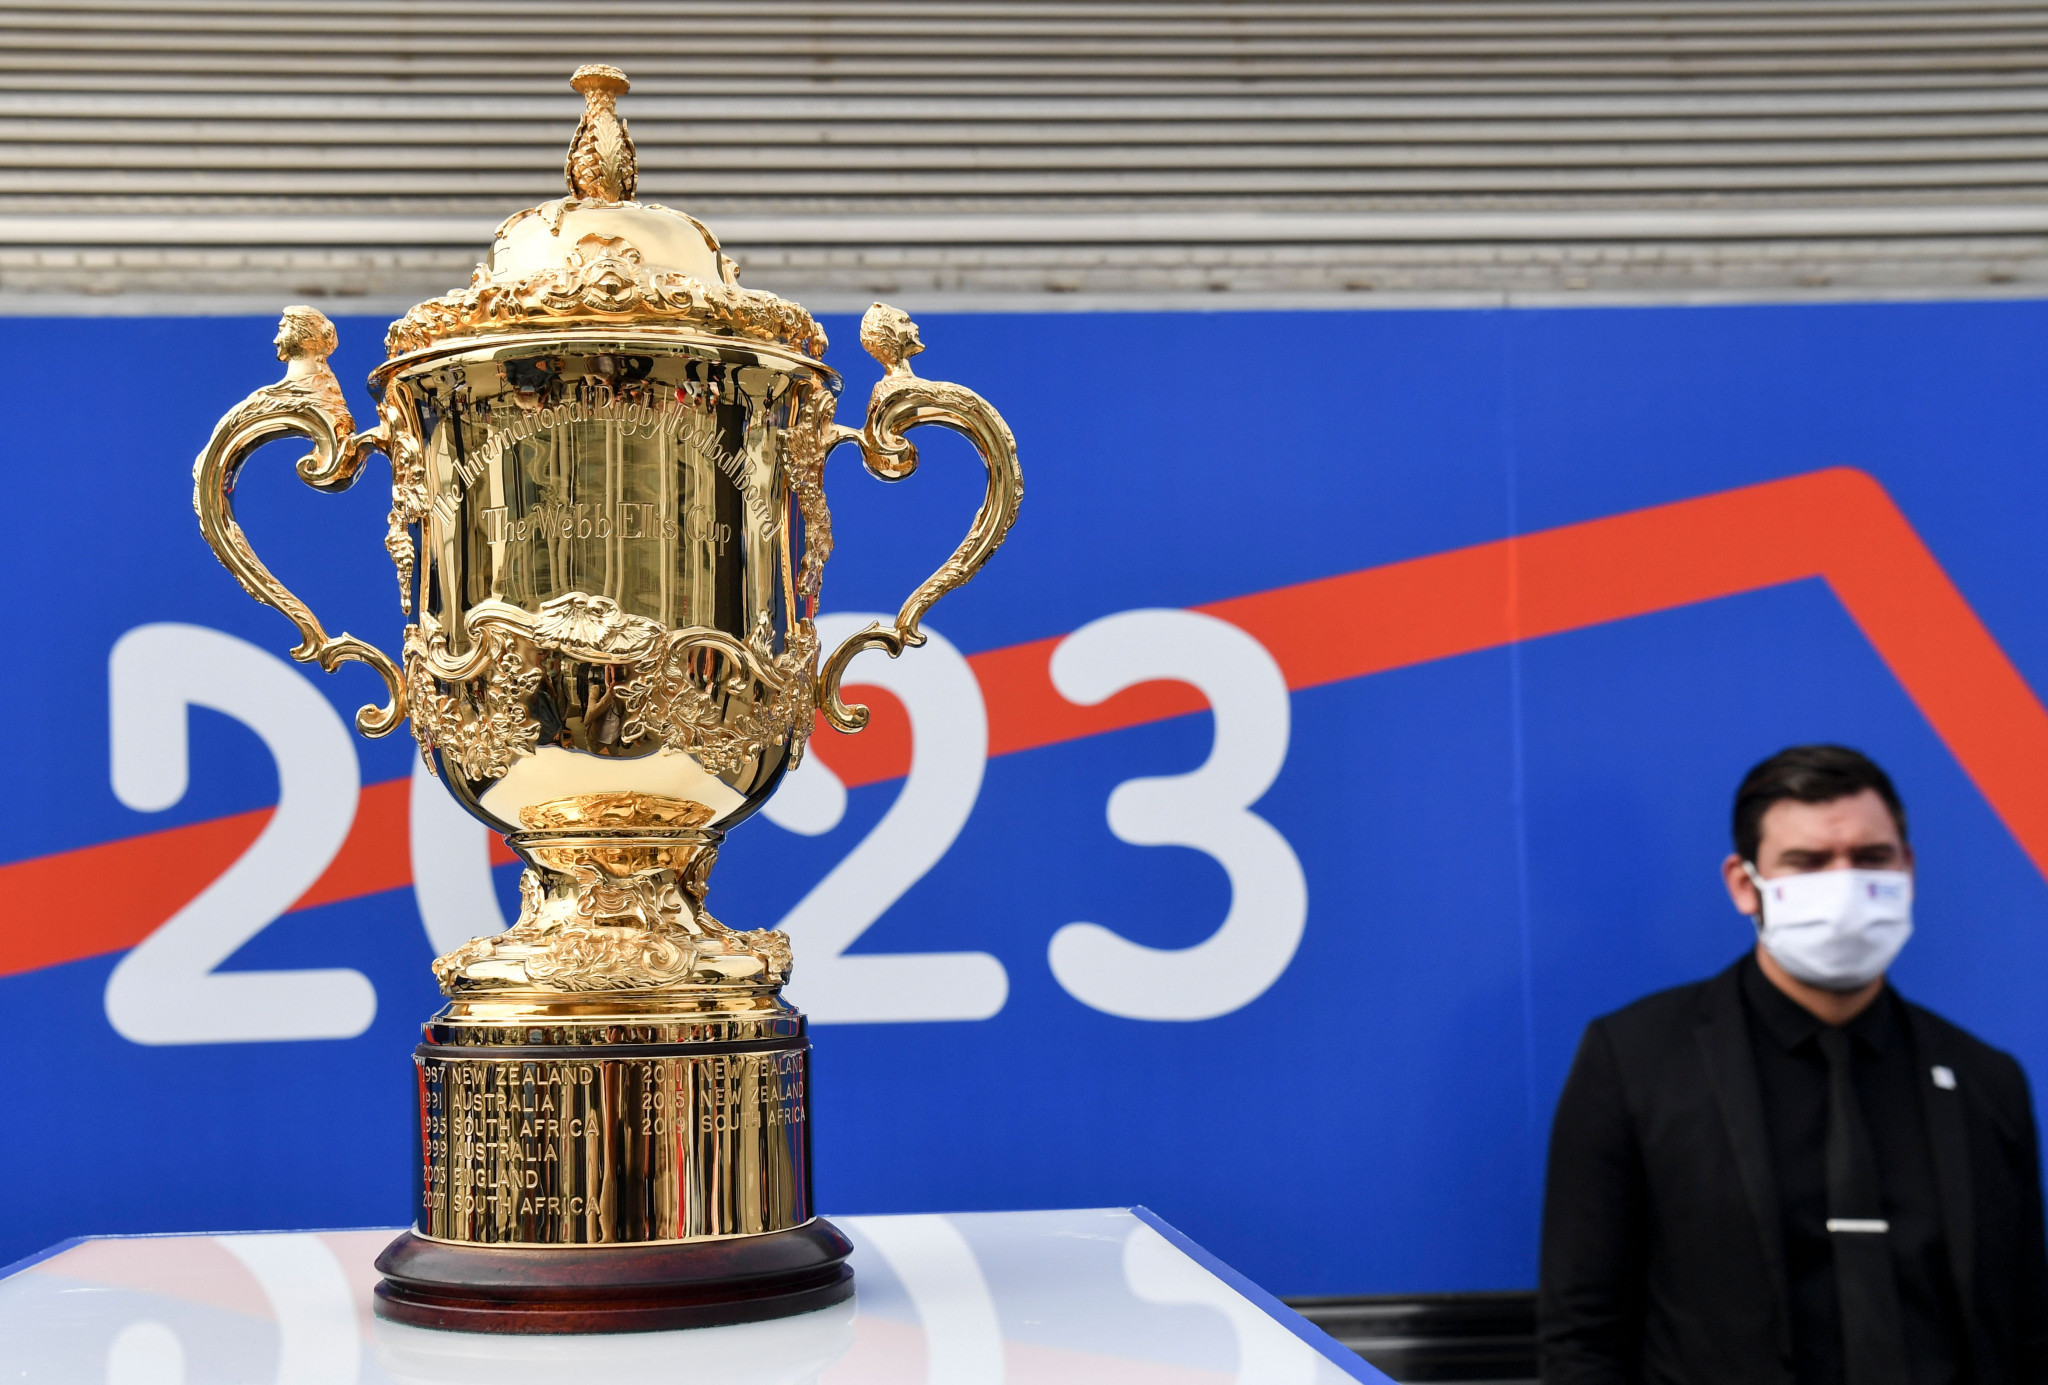 The France 2023 Organising Committee celebrated three years to go until the Rugby World Cup at an event in Paris ©Getty Images